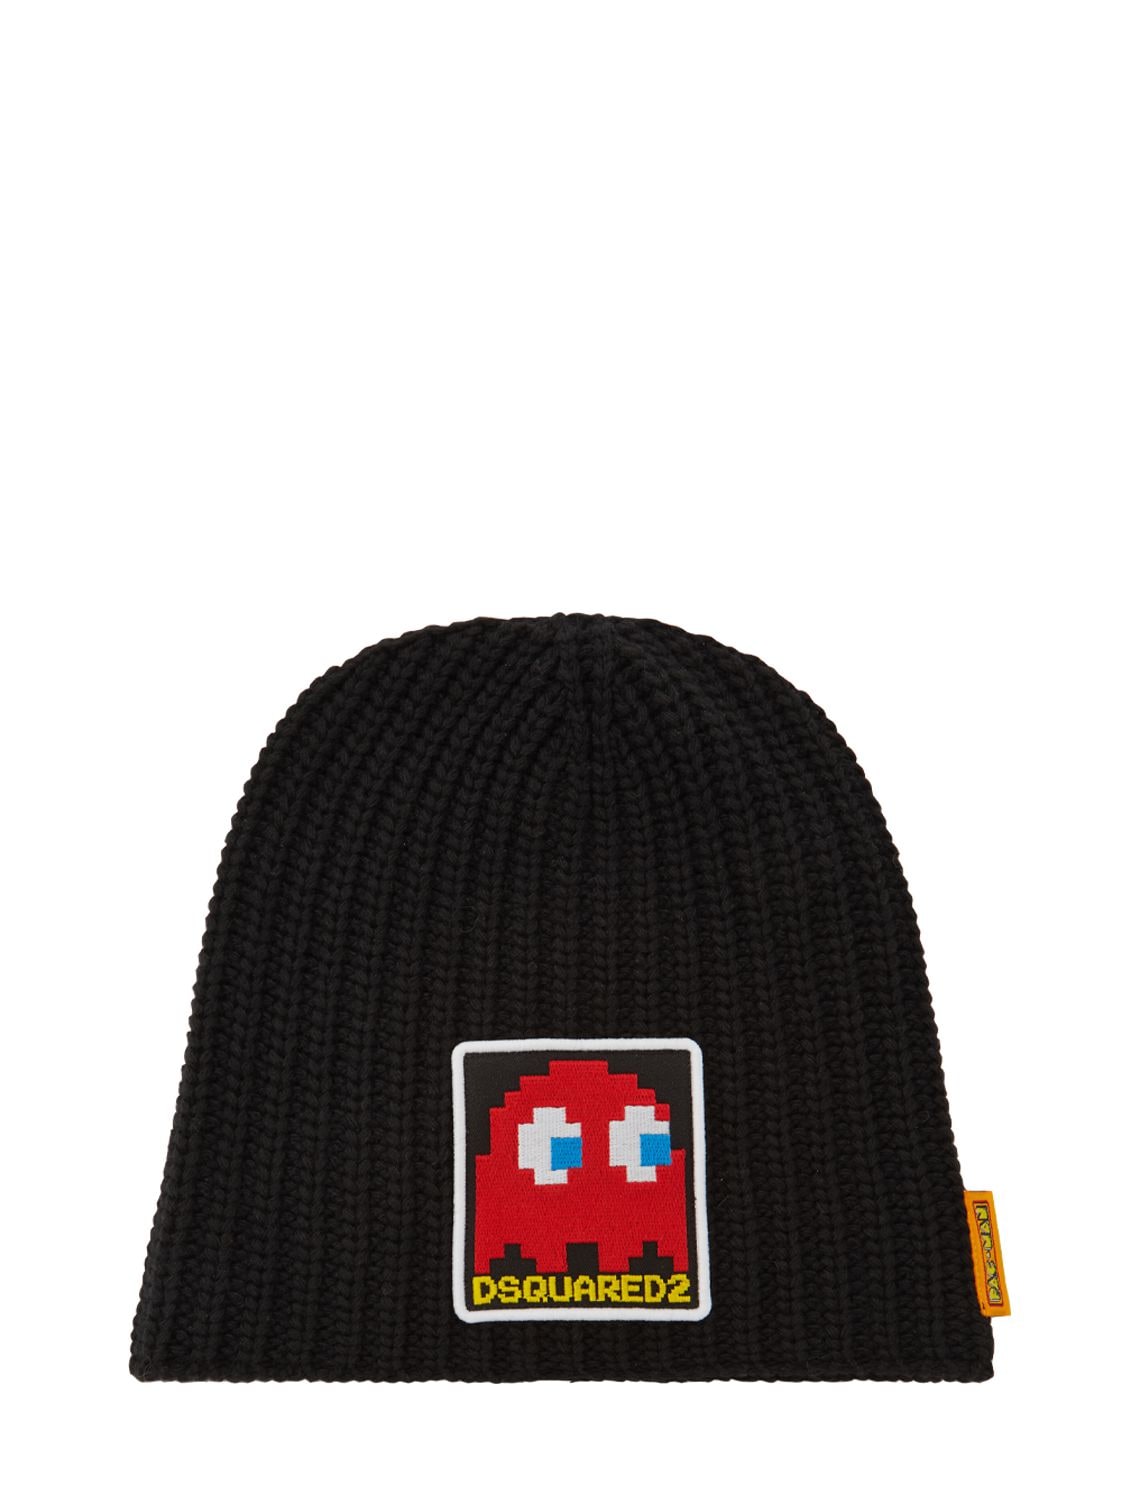 DSQUARED2 PACMAN RIBBED KNIT BEANIE